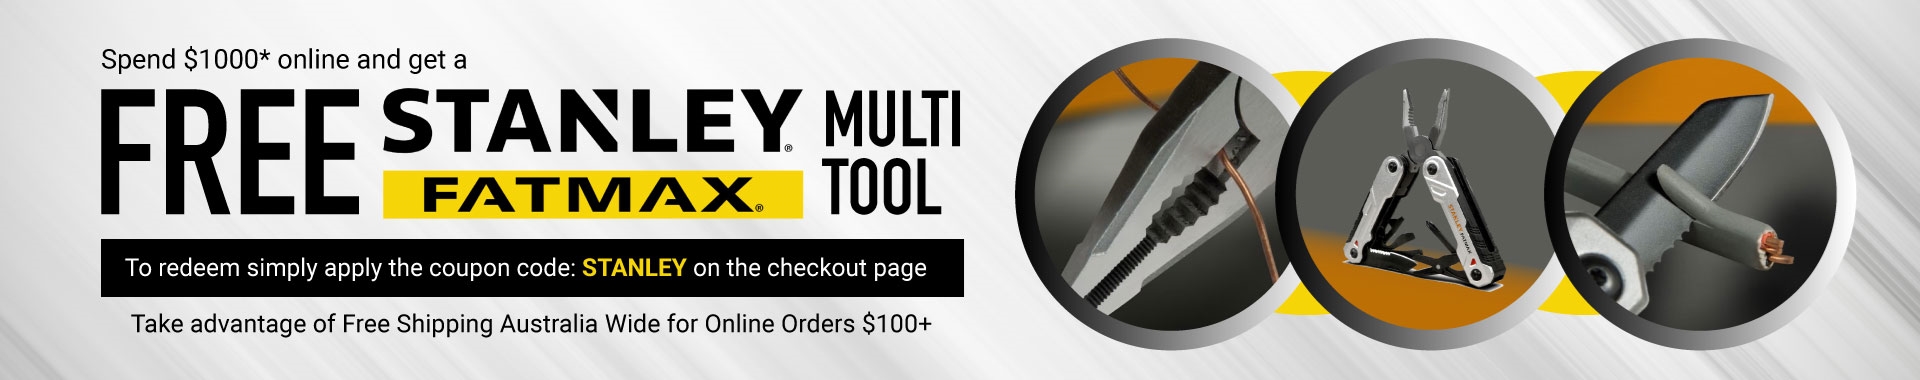 Get a Stanley Multitool